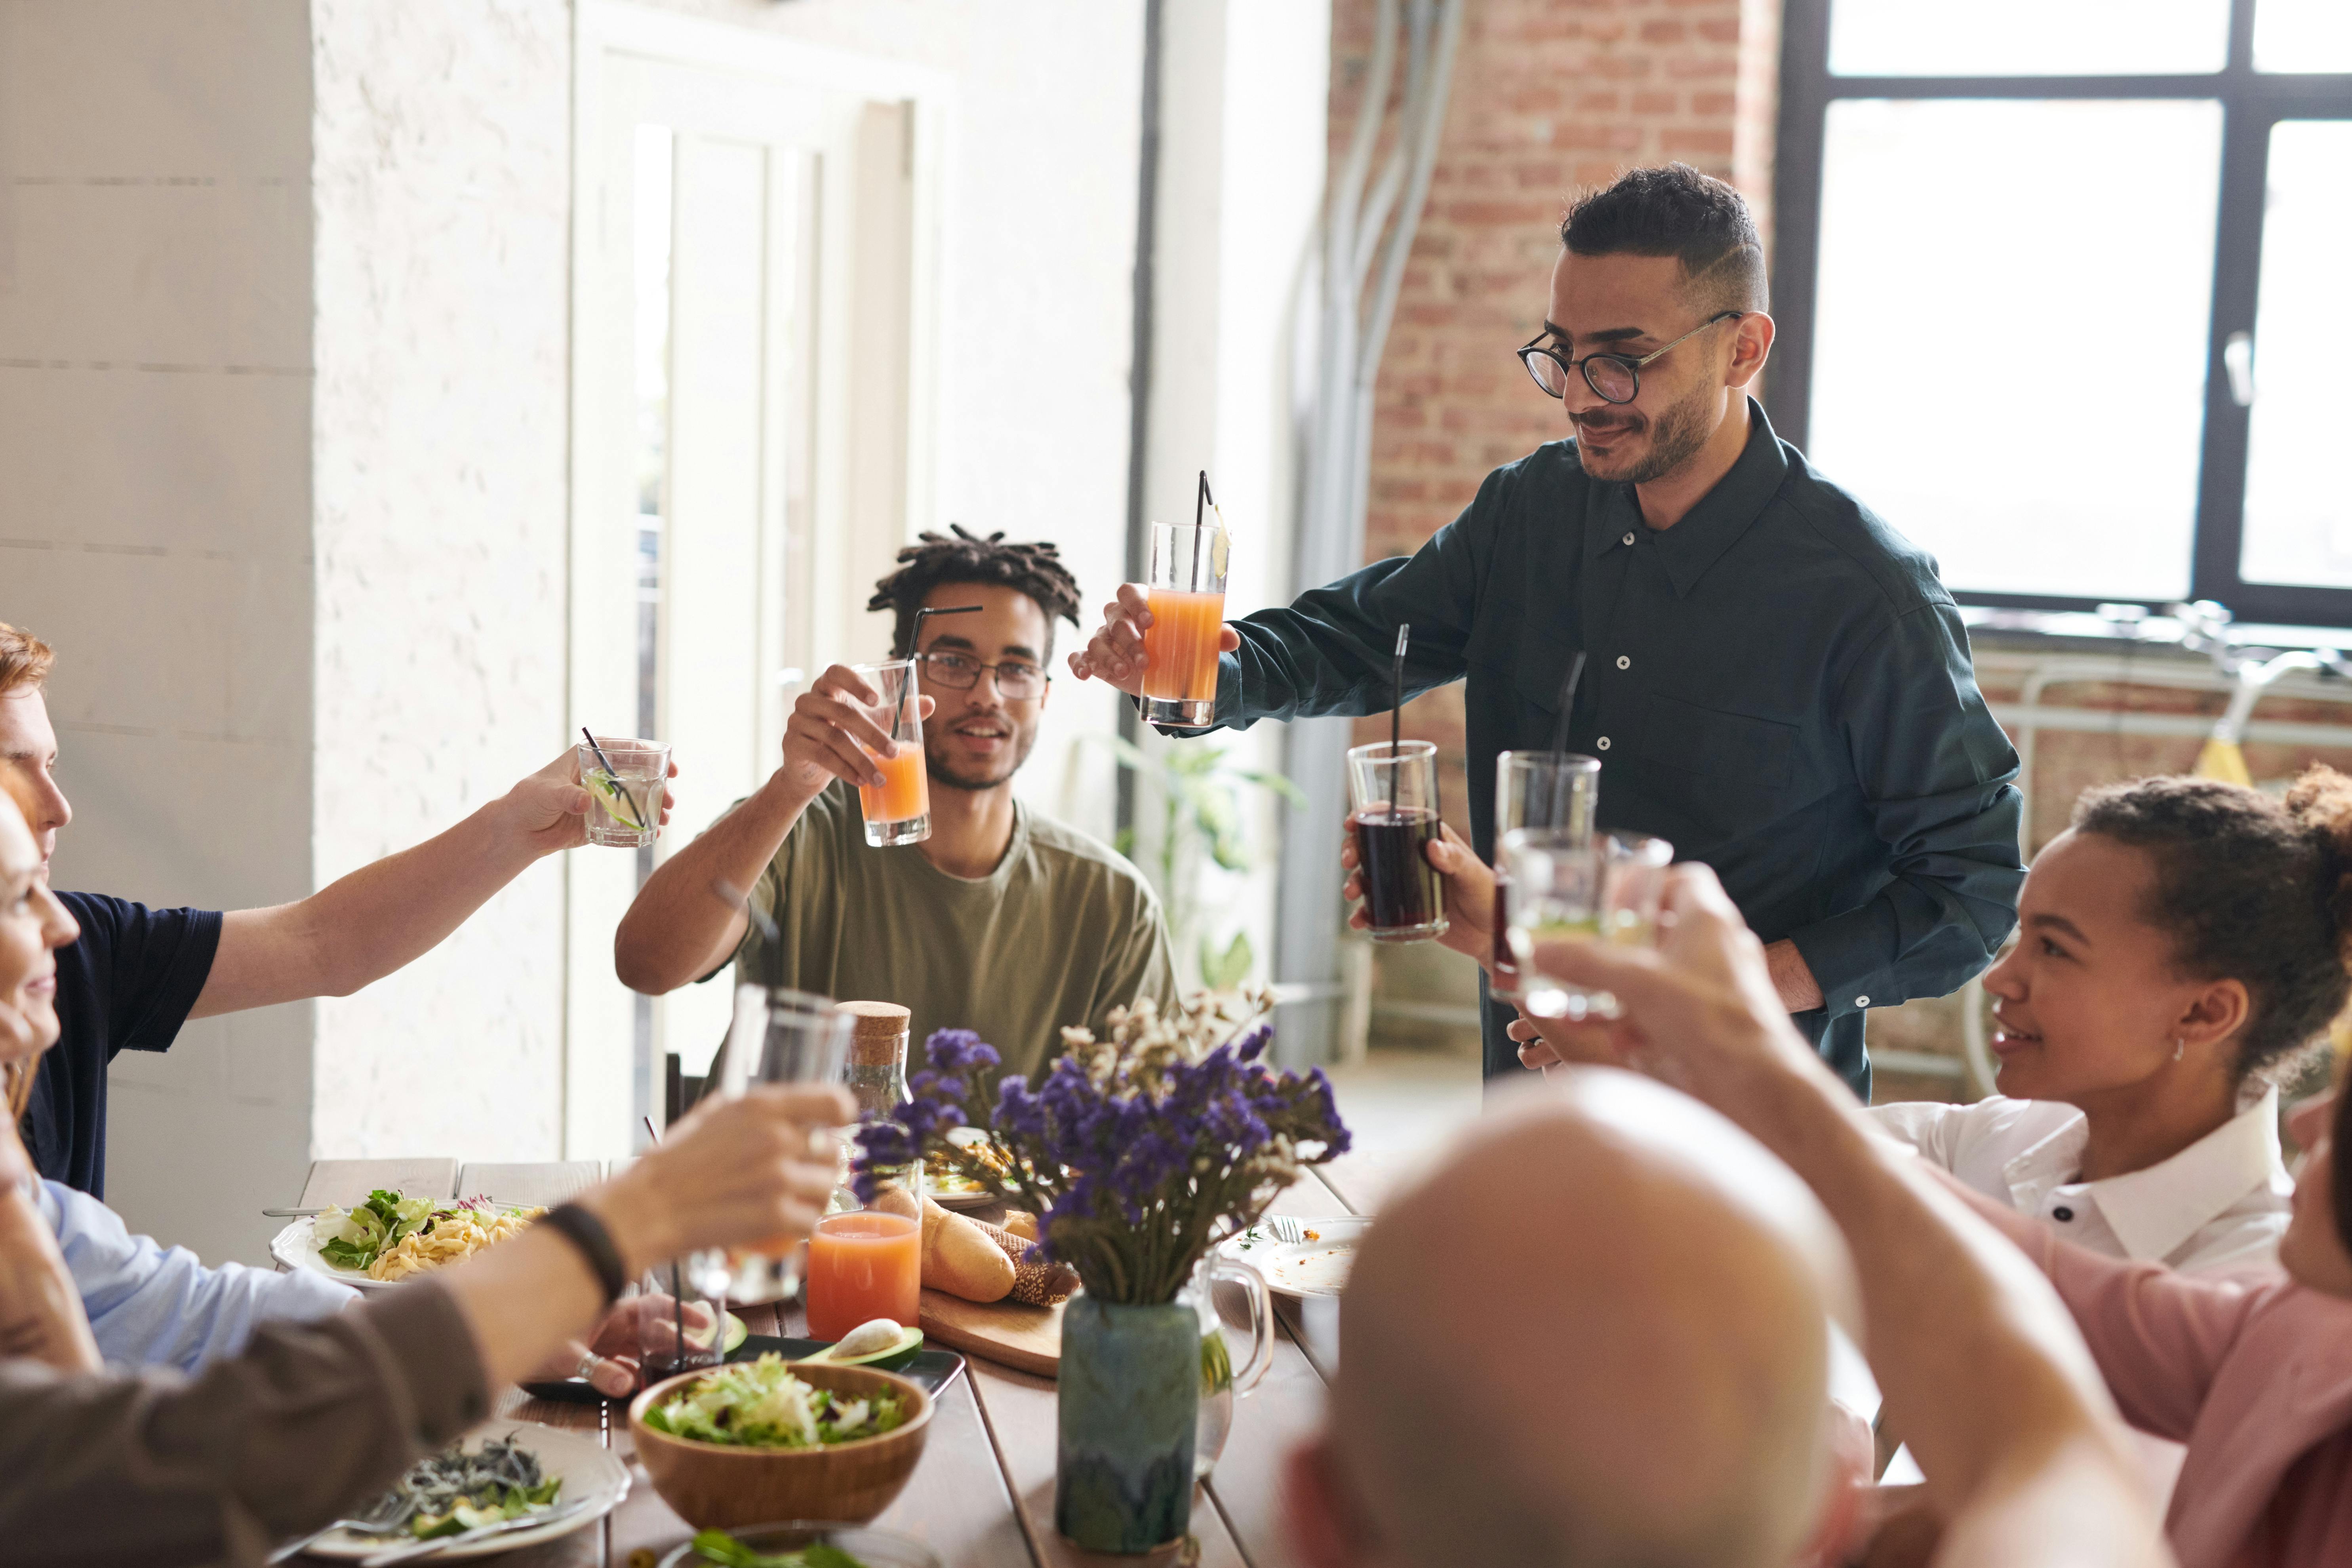 People enjoying a dinner party | Source: Pexels